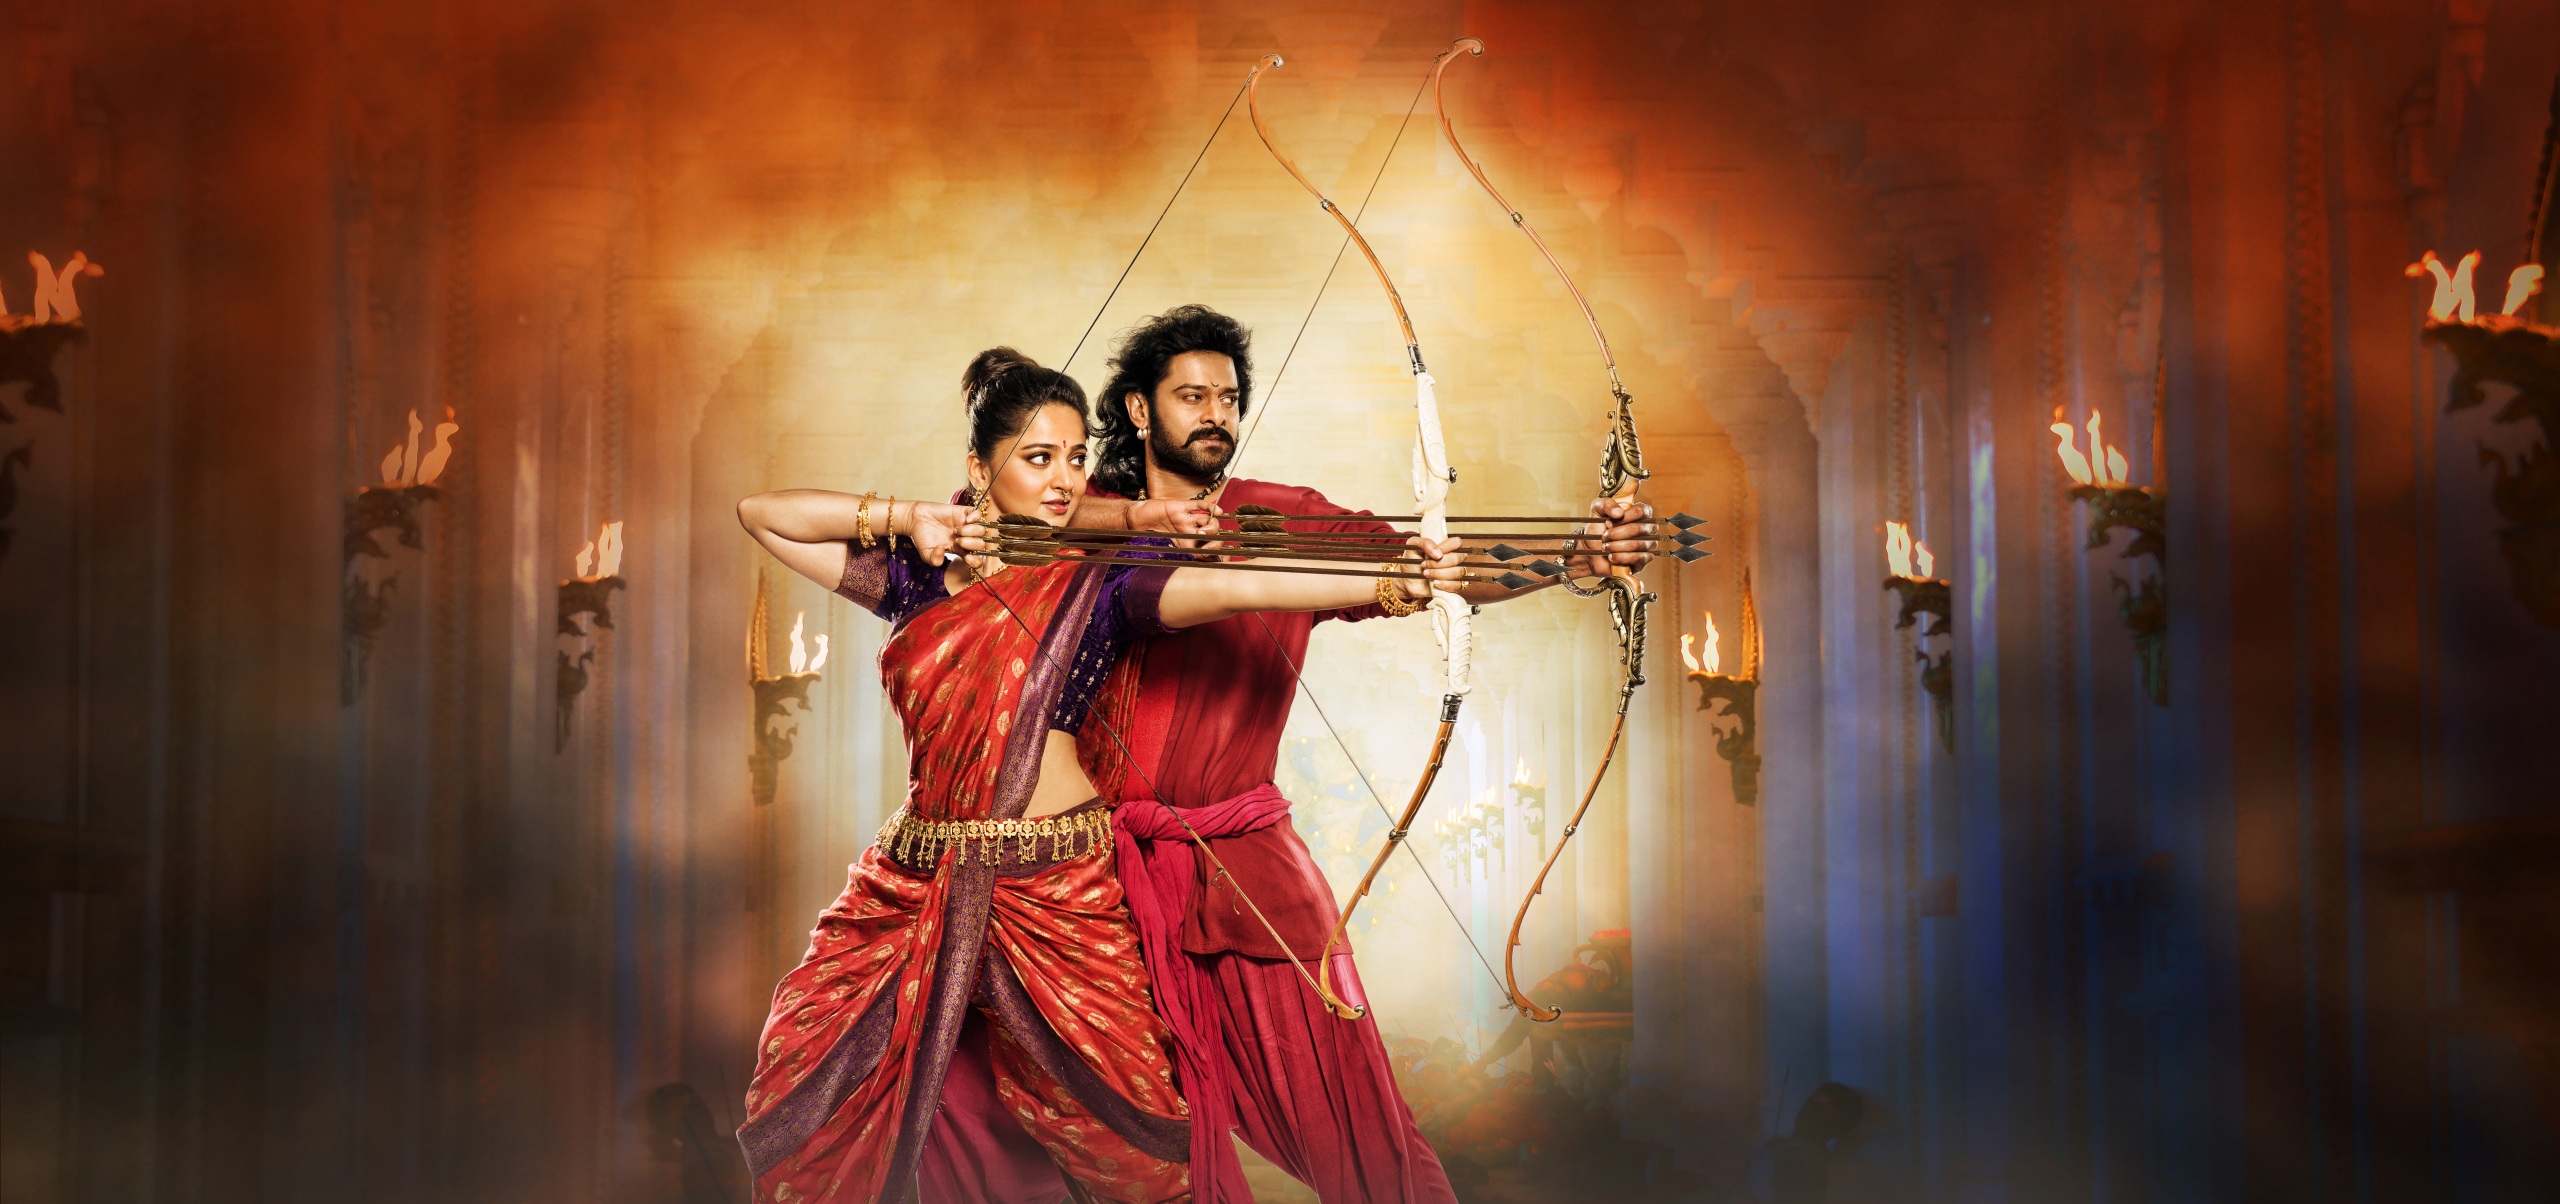 Movie Baahubali 2: The Conclusion HD Wallpaper | Background Image